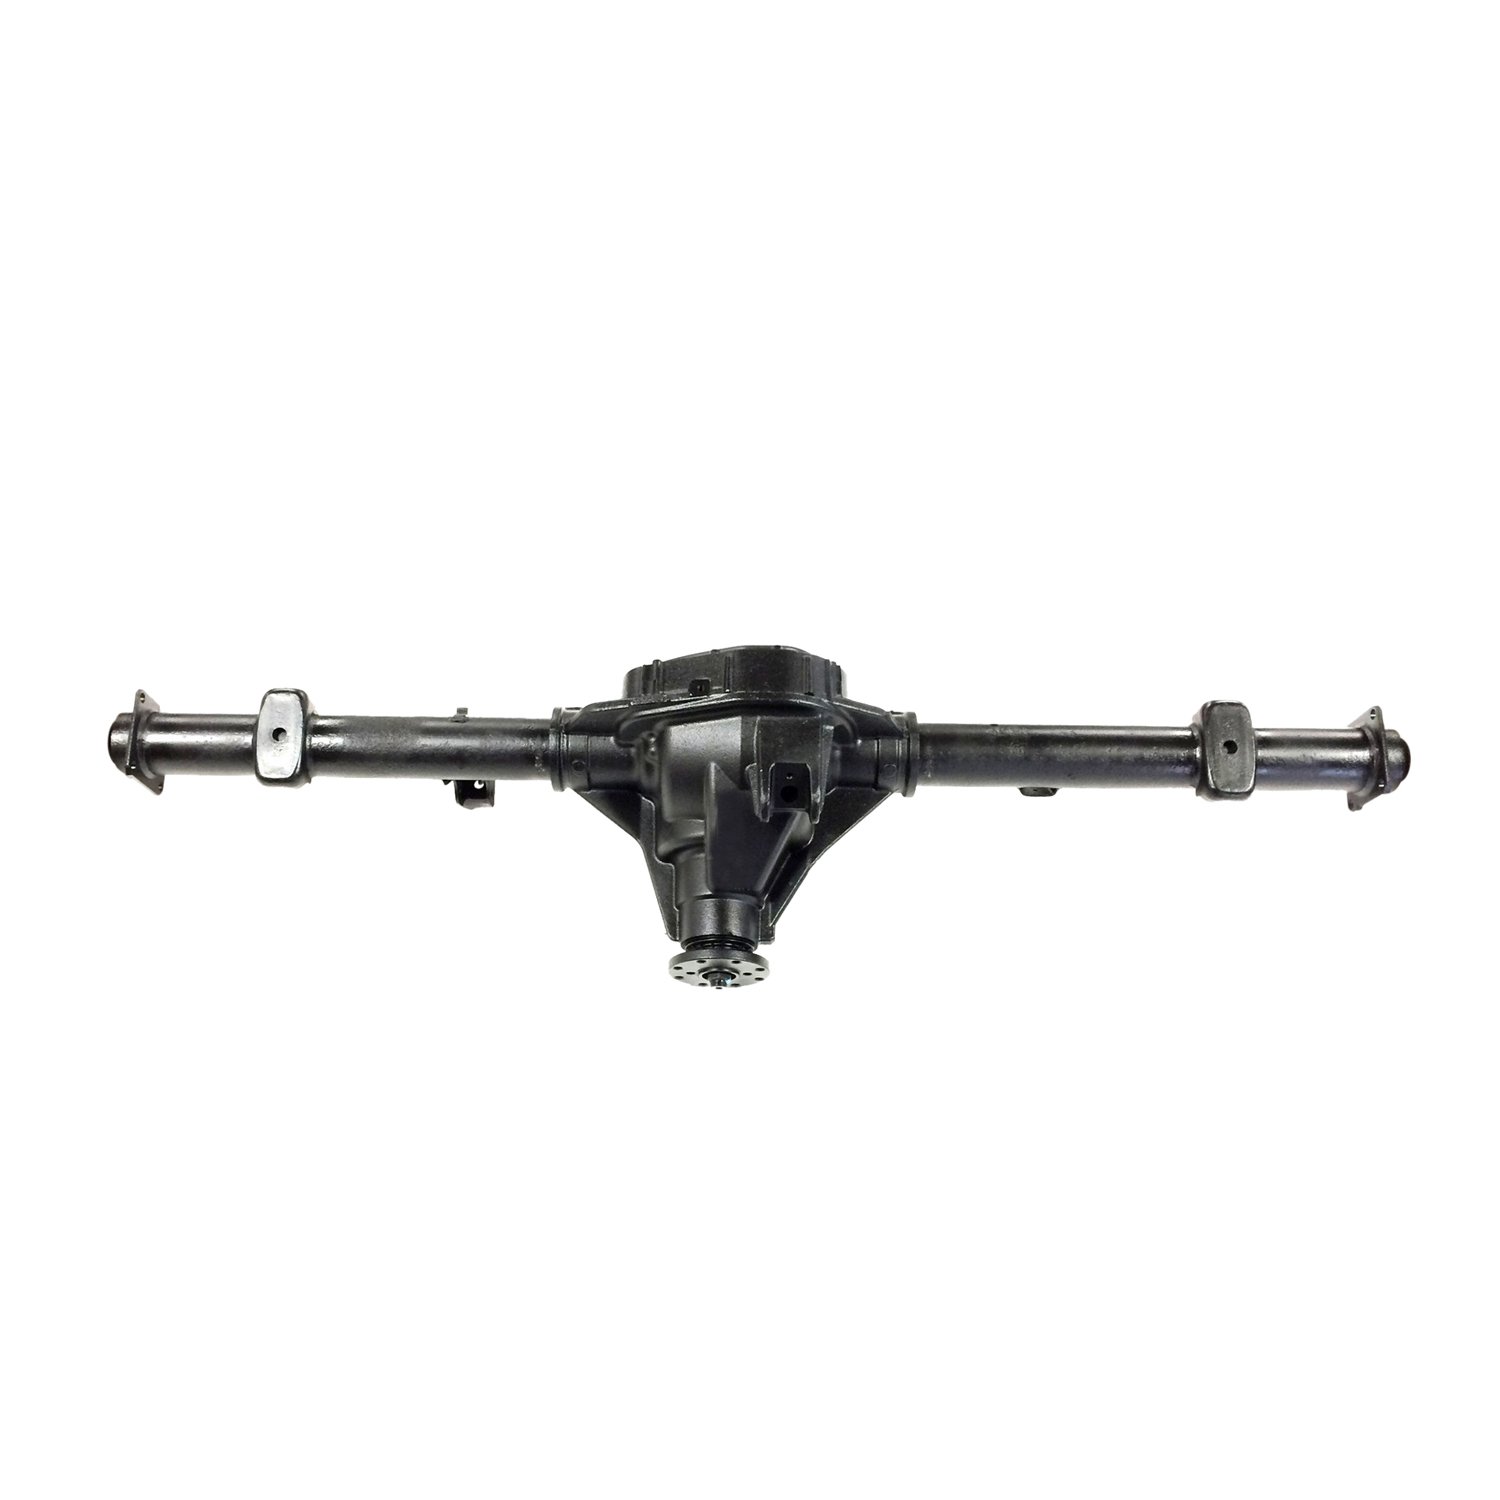 Remanufactured Complete Axle Assembly for 9.75" 2011 F150 4.11 , 6 Lug, Posi LSD